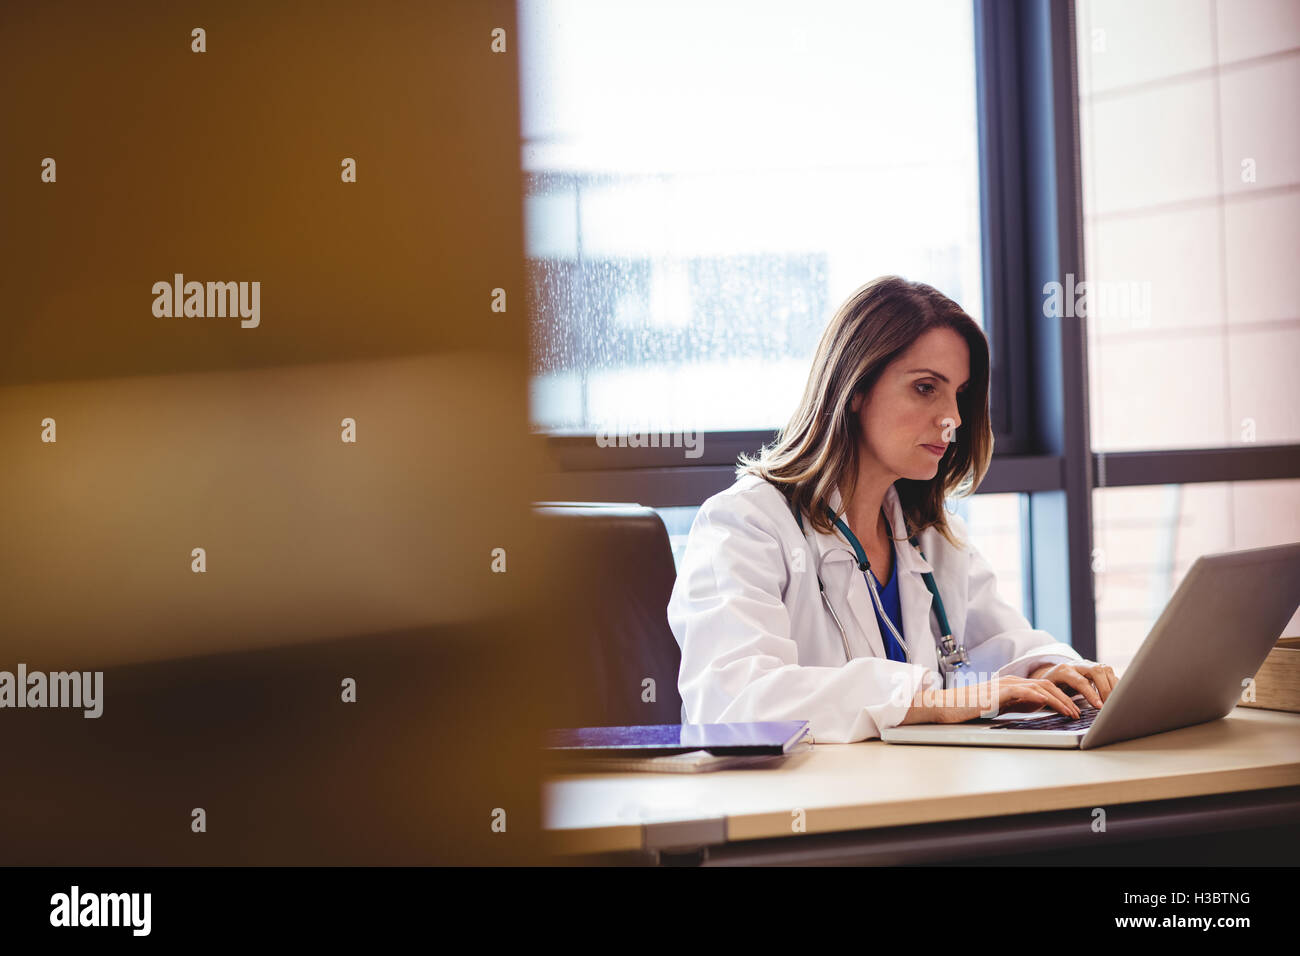 Female doctor using laptop at her desk Stock Photo